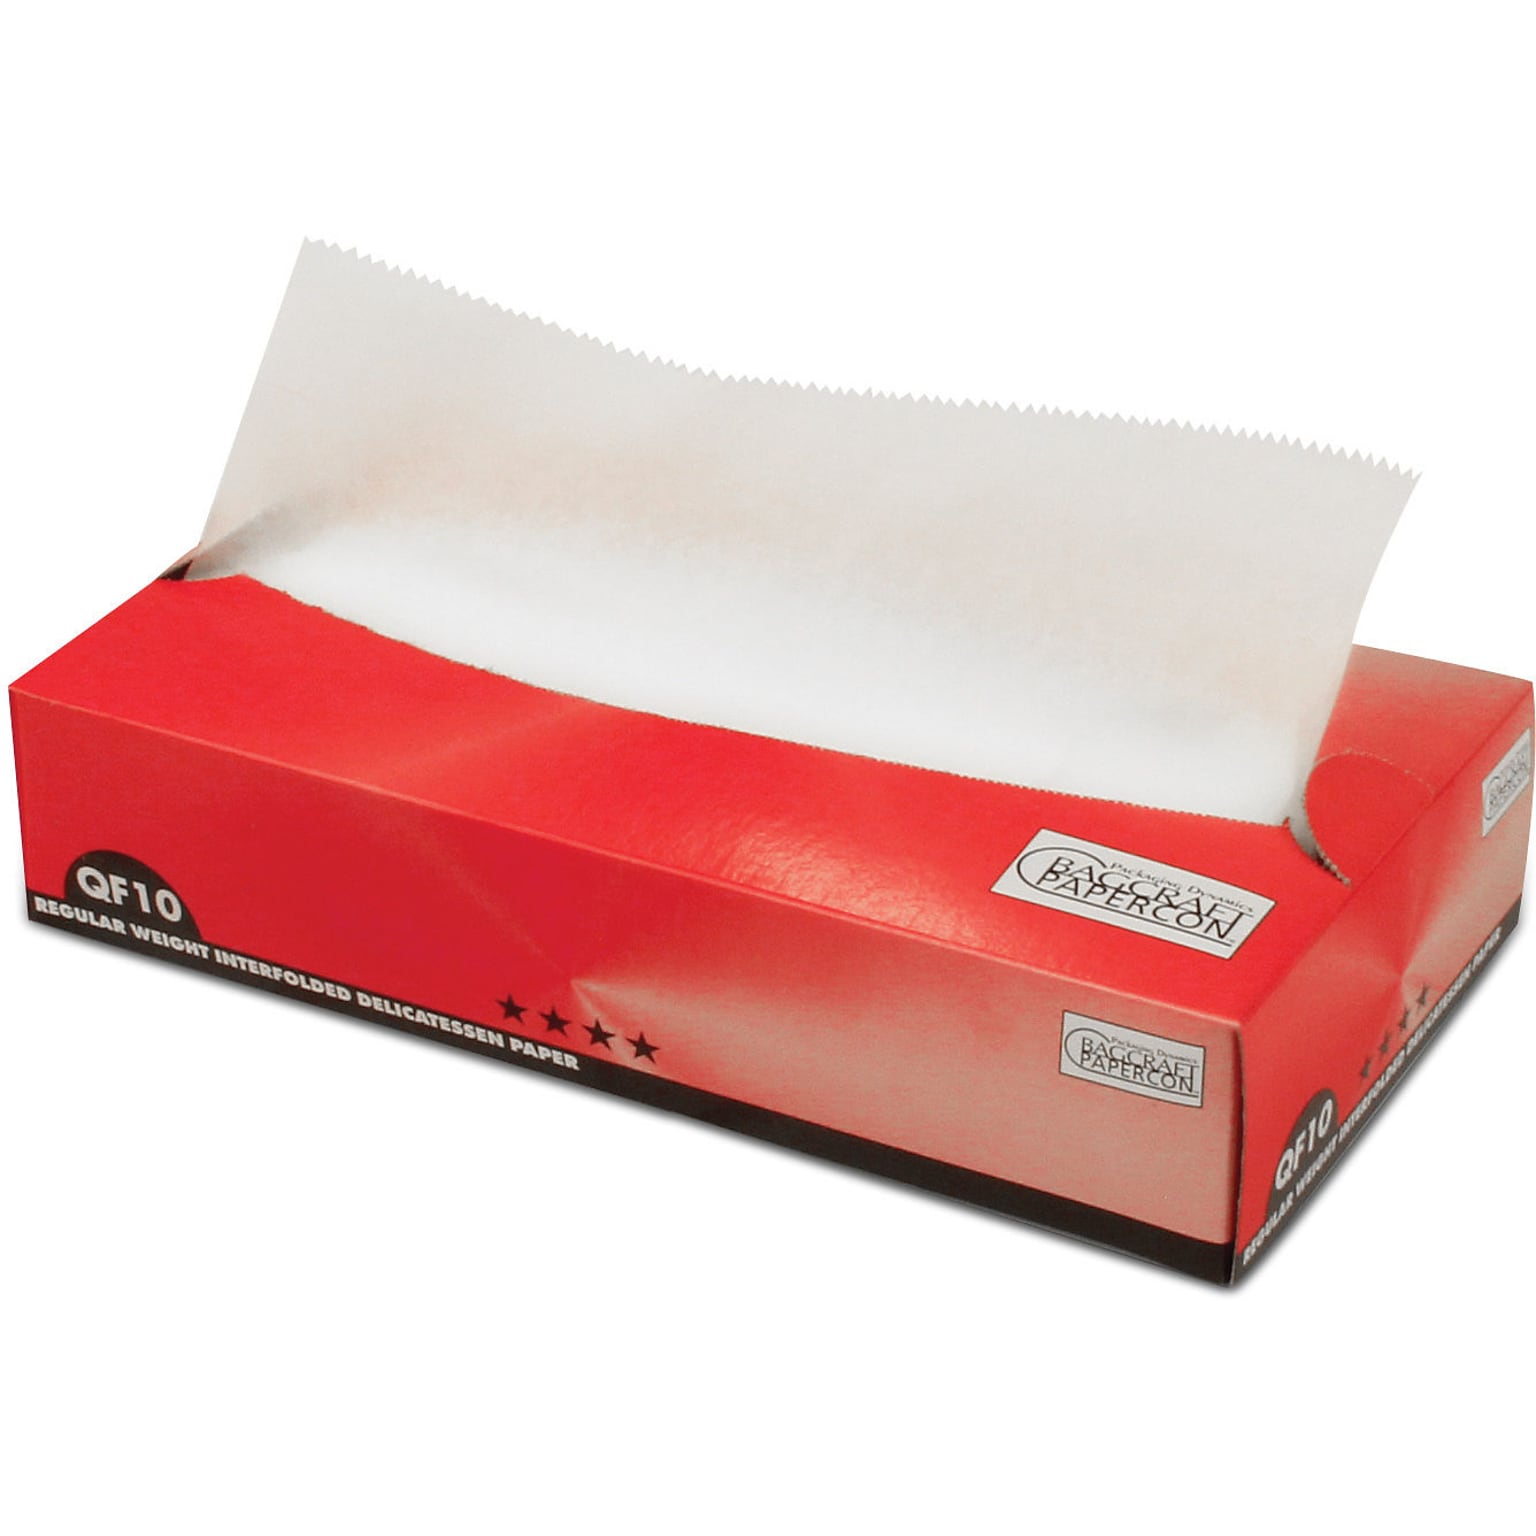 Bagcraft Papercon Interfolded Dry Wax Deli Paper, White, 500 Sheets/Box, 12 Boxes/Carton (011010)